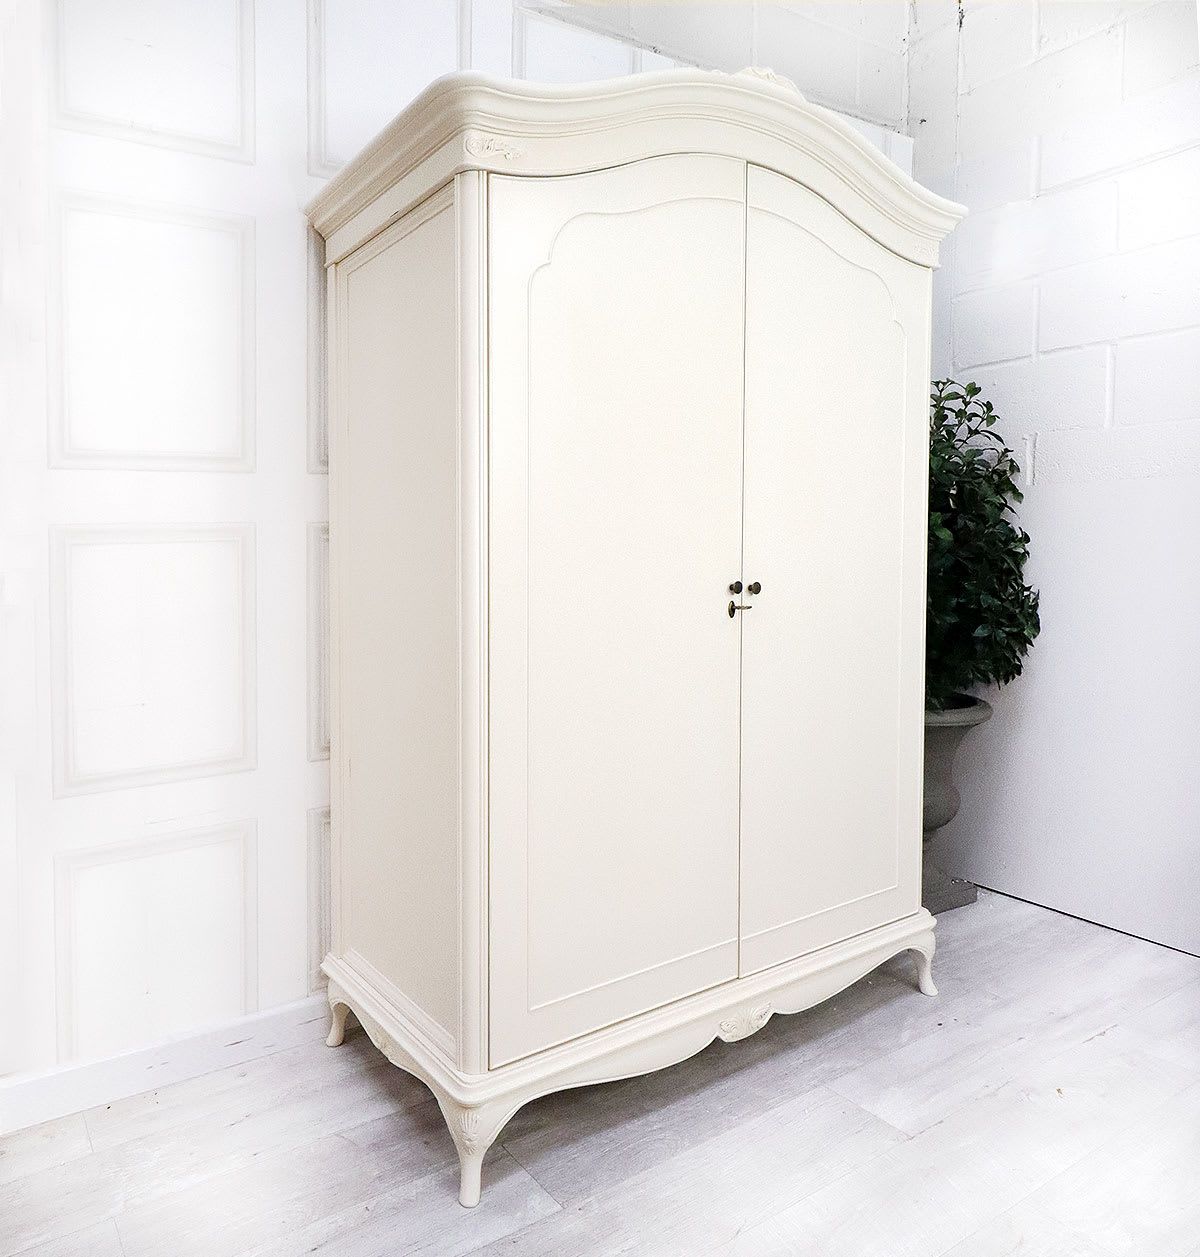 Willis & Gambier French Style Ivory Large Armoire Wardrobe | Nicky Cornell  A Uk Stockist Pertaining To French Armoire Wardrobes (View 5 of 20)